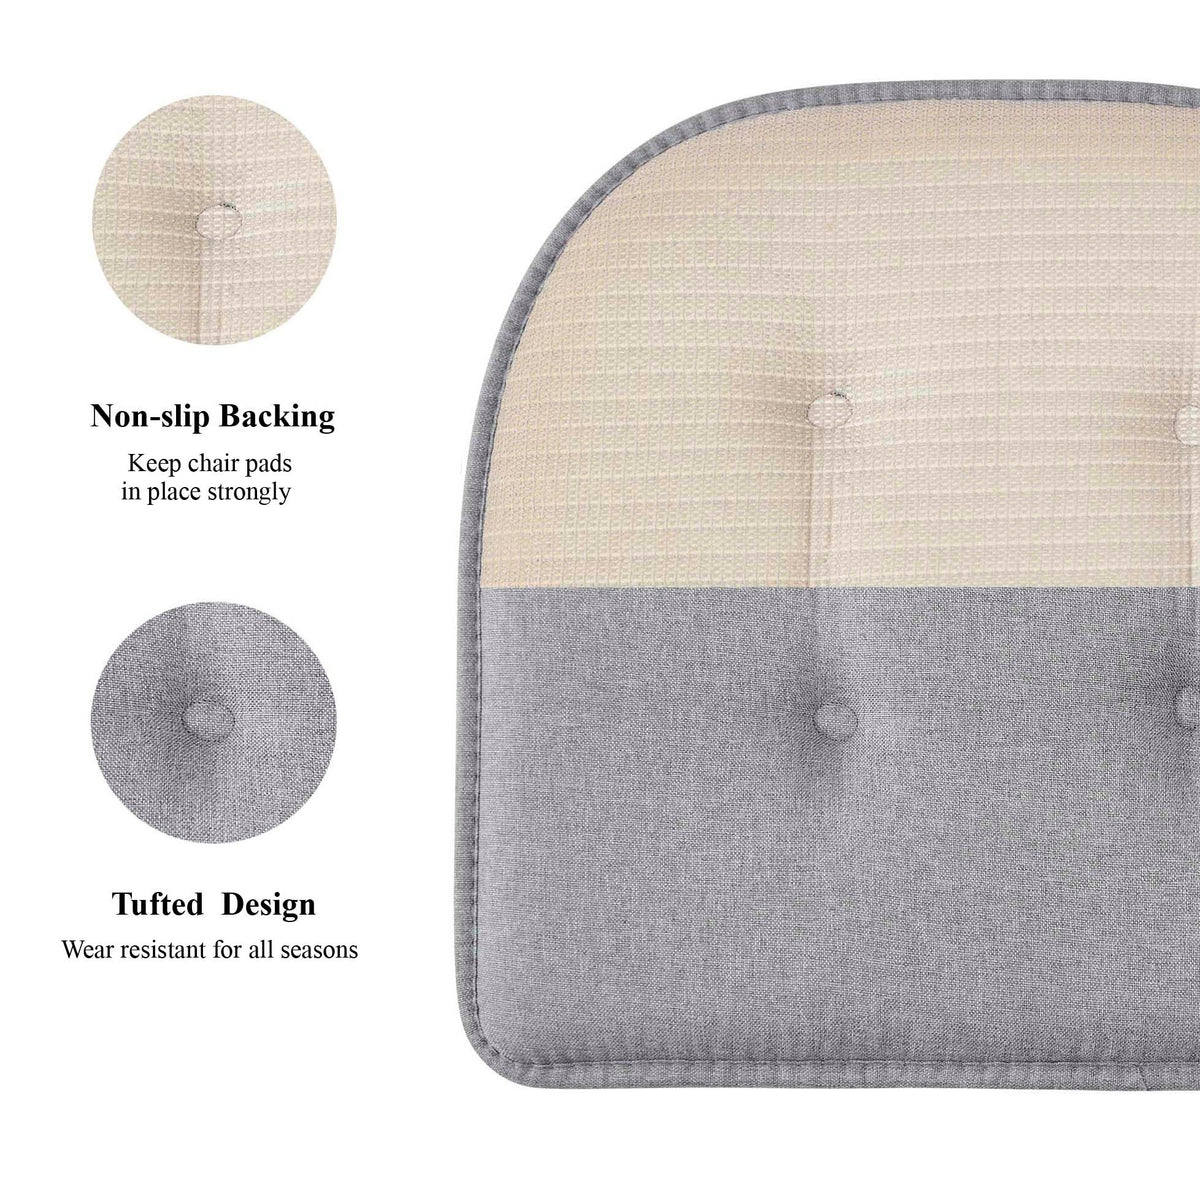 Premium Thick Comfortable Cushion U-Shaped Memory Foam Chair Pads Tufted Nonslip Rubber Back Seat 17 x 16 Inch Indoor Seat Cover